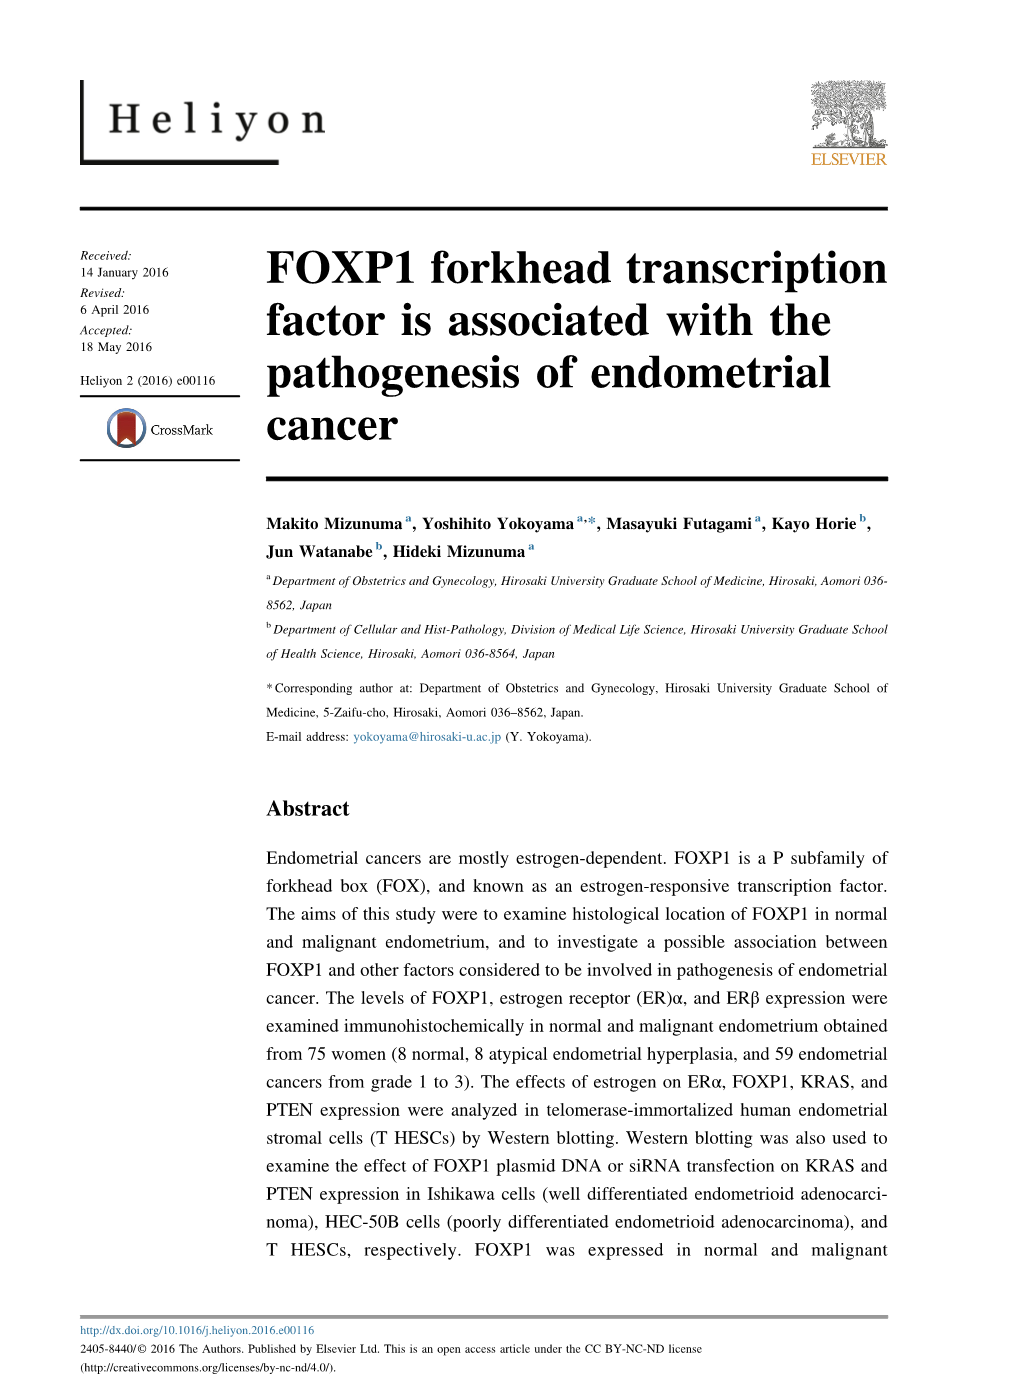 FOXP1 Forkhead Transcription Factor Is Associated with the Pathogenesis of Endometrial Cancer